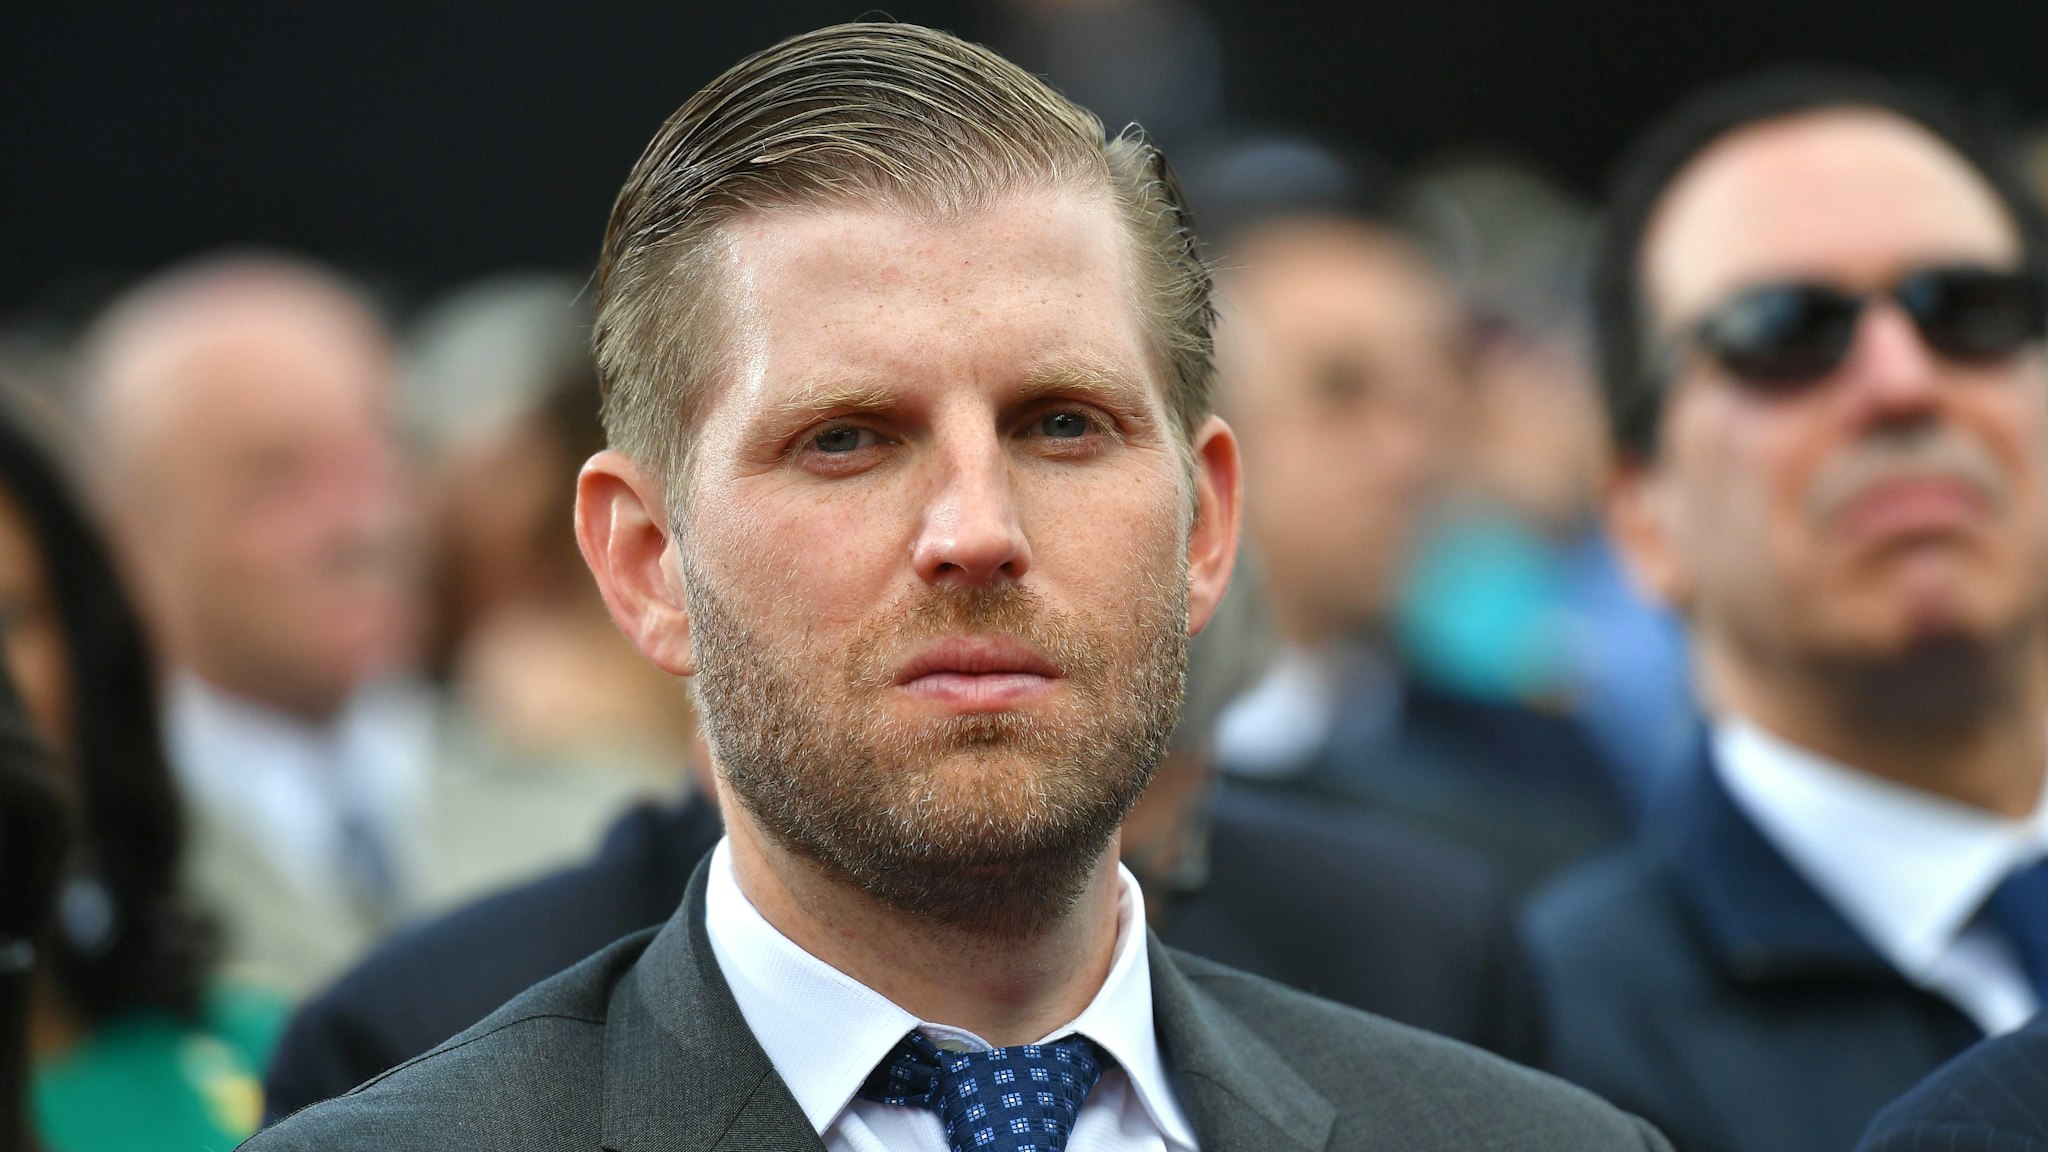 US businessman and son of the US president Eric Trump attends a French-US ceremony at the Normandy American Cemetery and Memorial in Colleville-sur-Mer, Normandy, northwestern France, on June 6, 2019, as part of D-Day commemorations marking the 75th anniversary of the World War II Allied landings in Normandy.